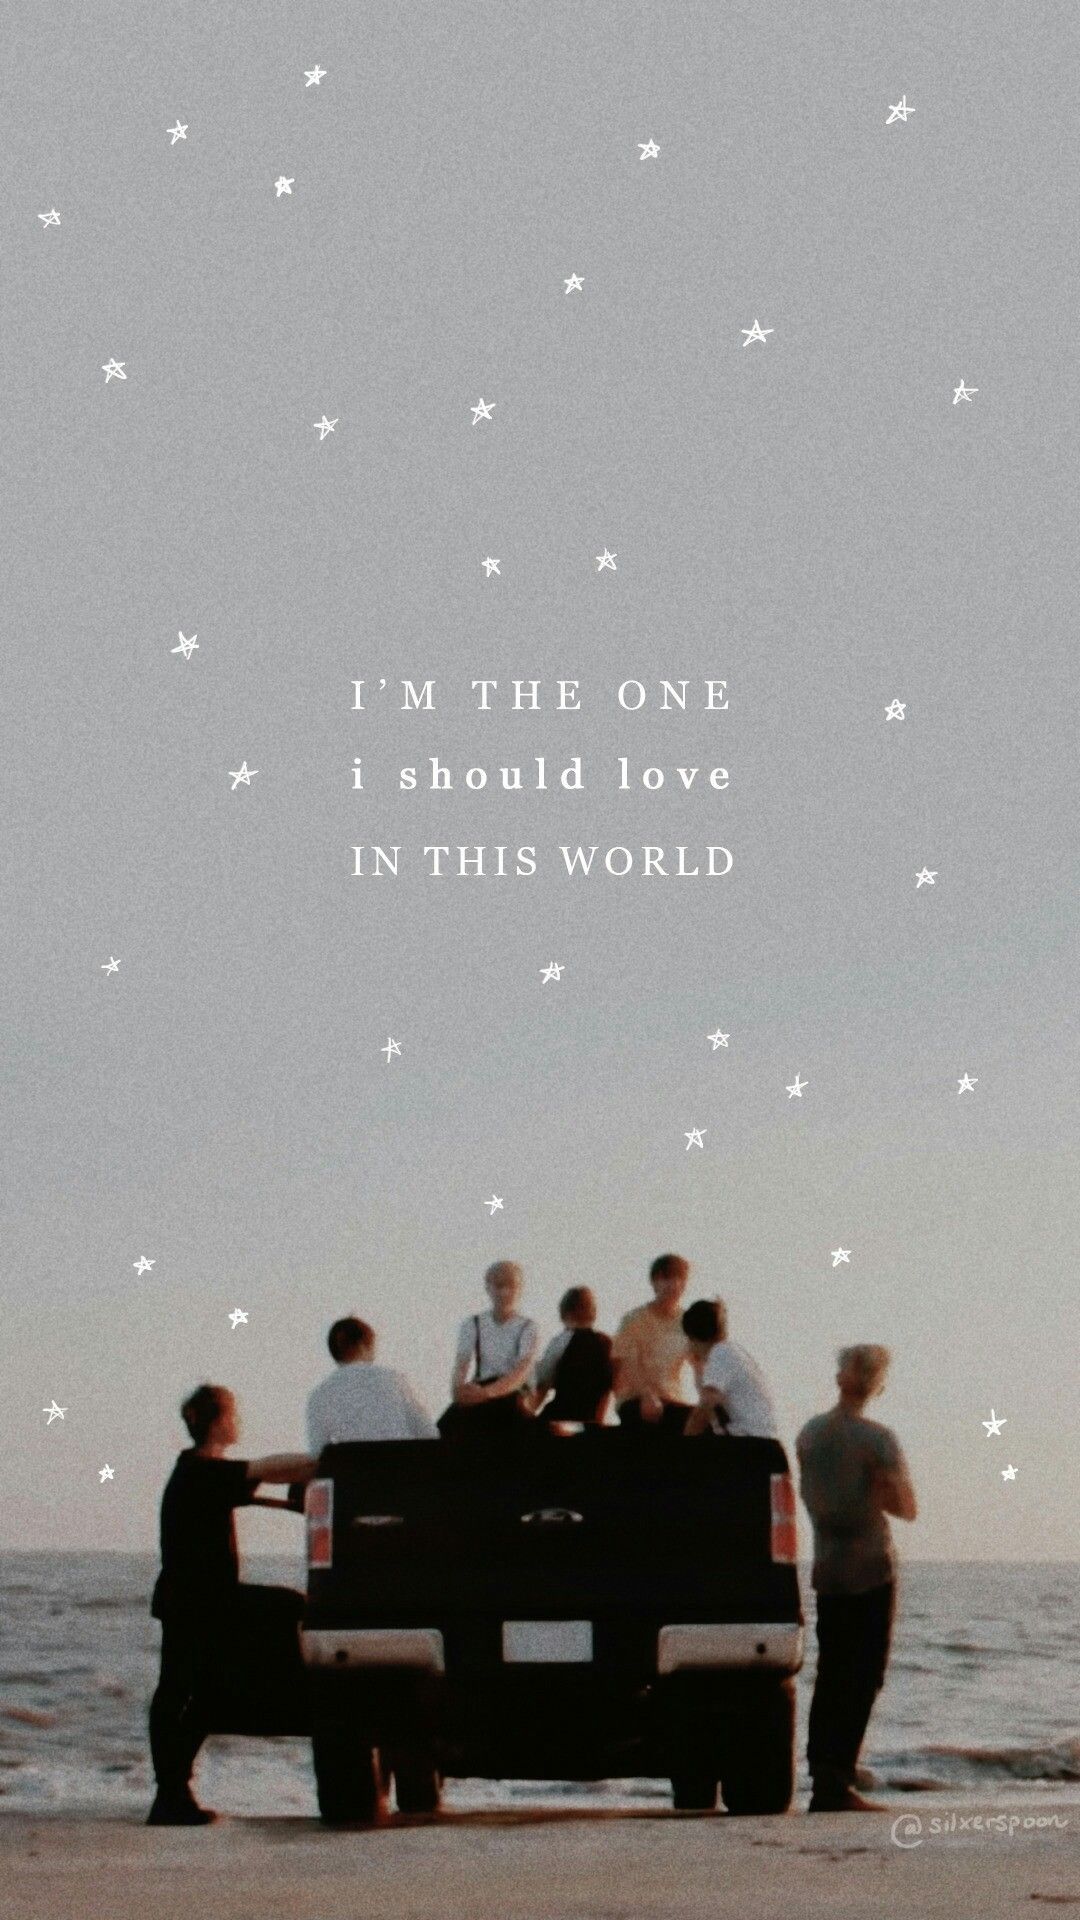 Bts Aesthetic Wallpapers